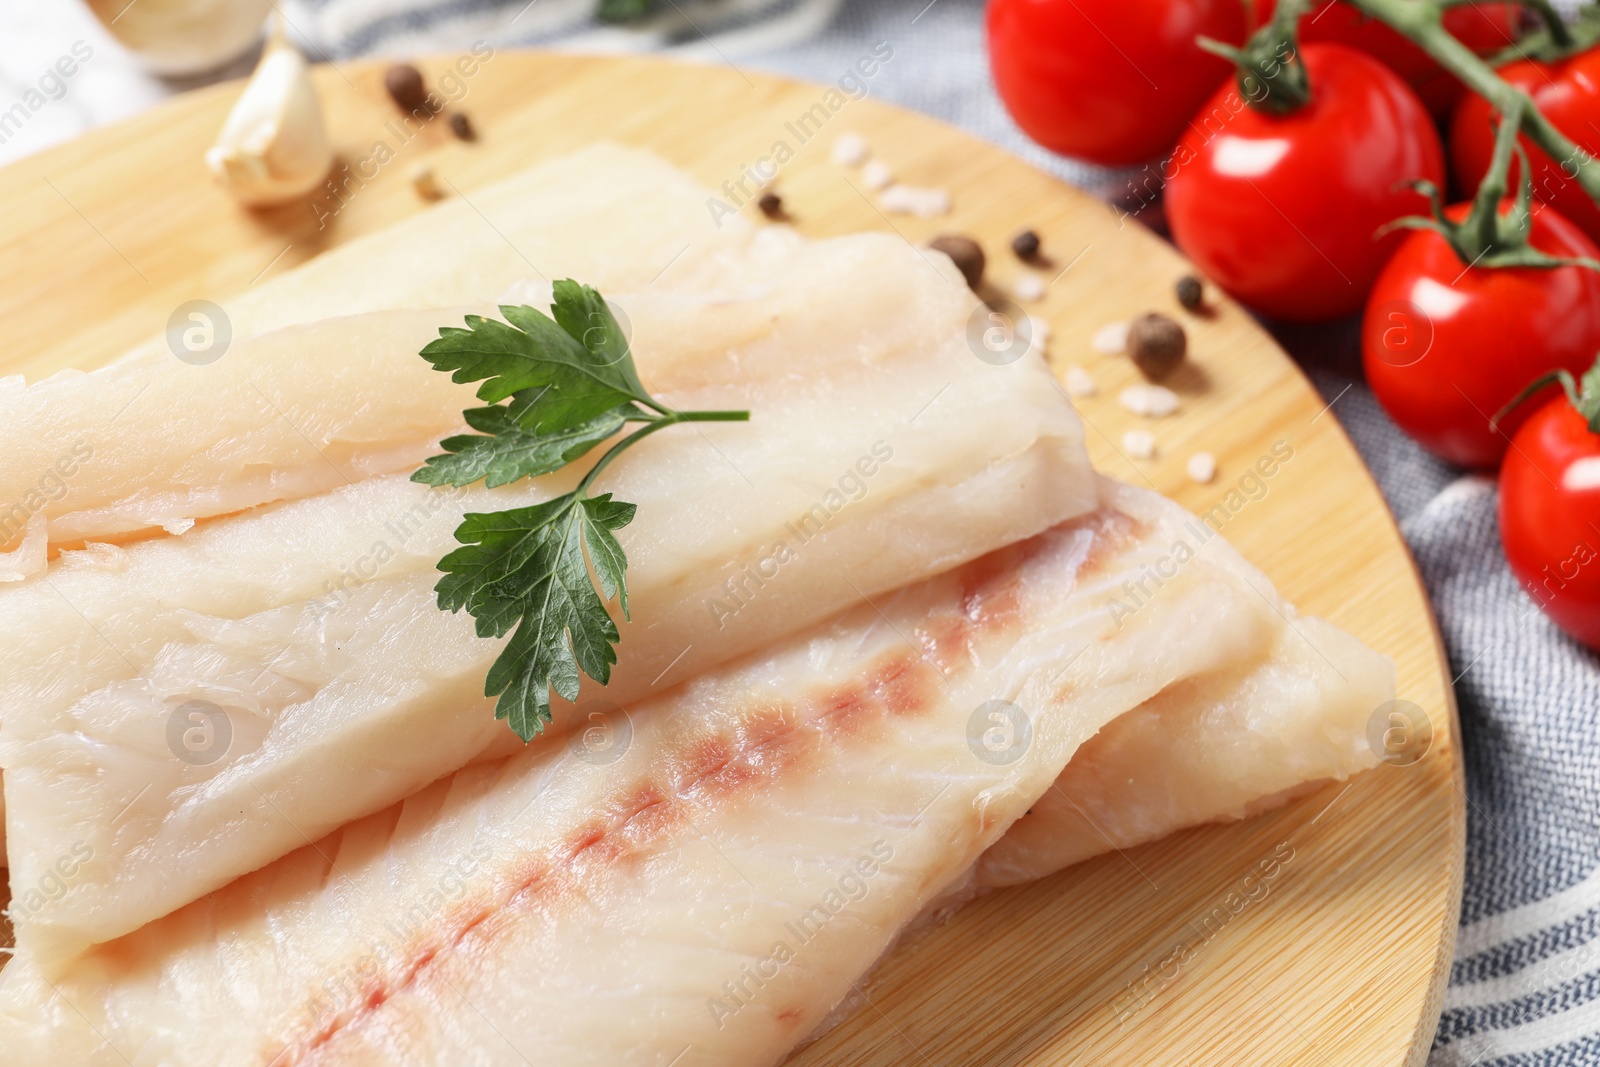 Photo of Pieces of raw cod fish, spices, parsley and tomatoes on table, closeup